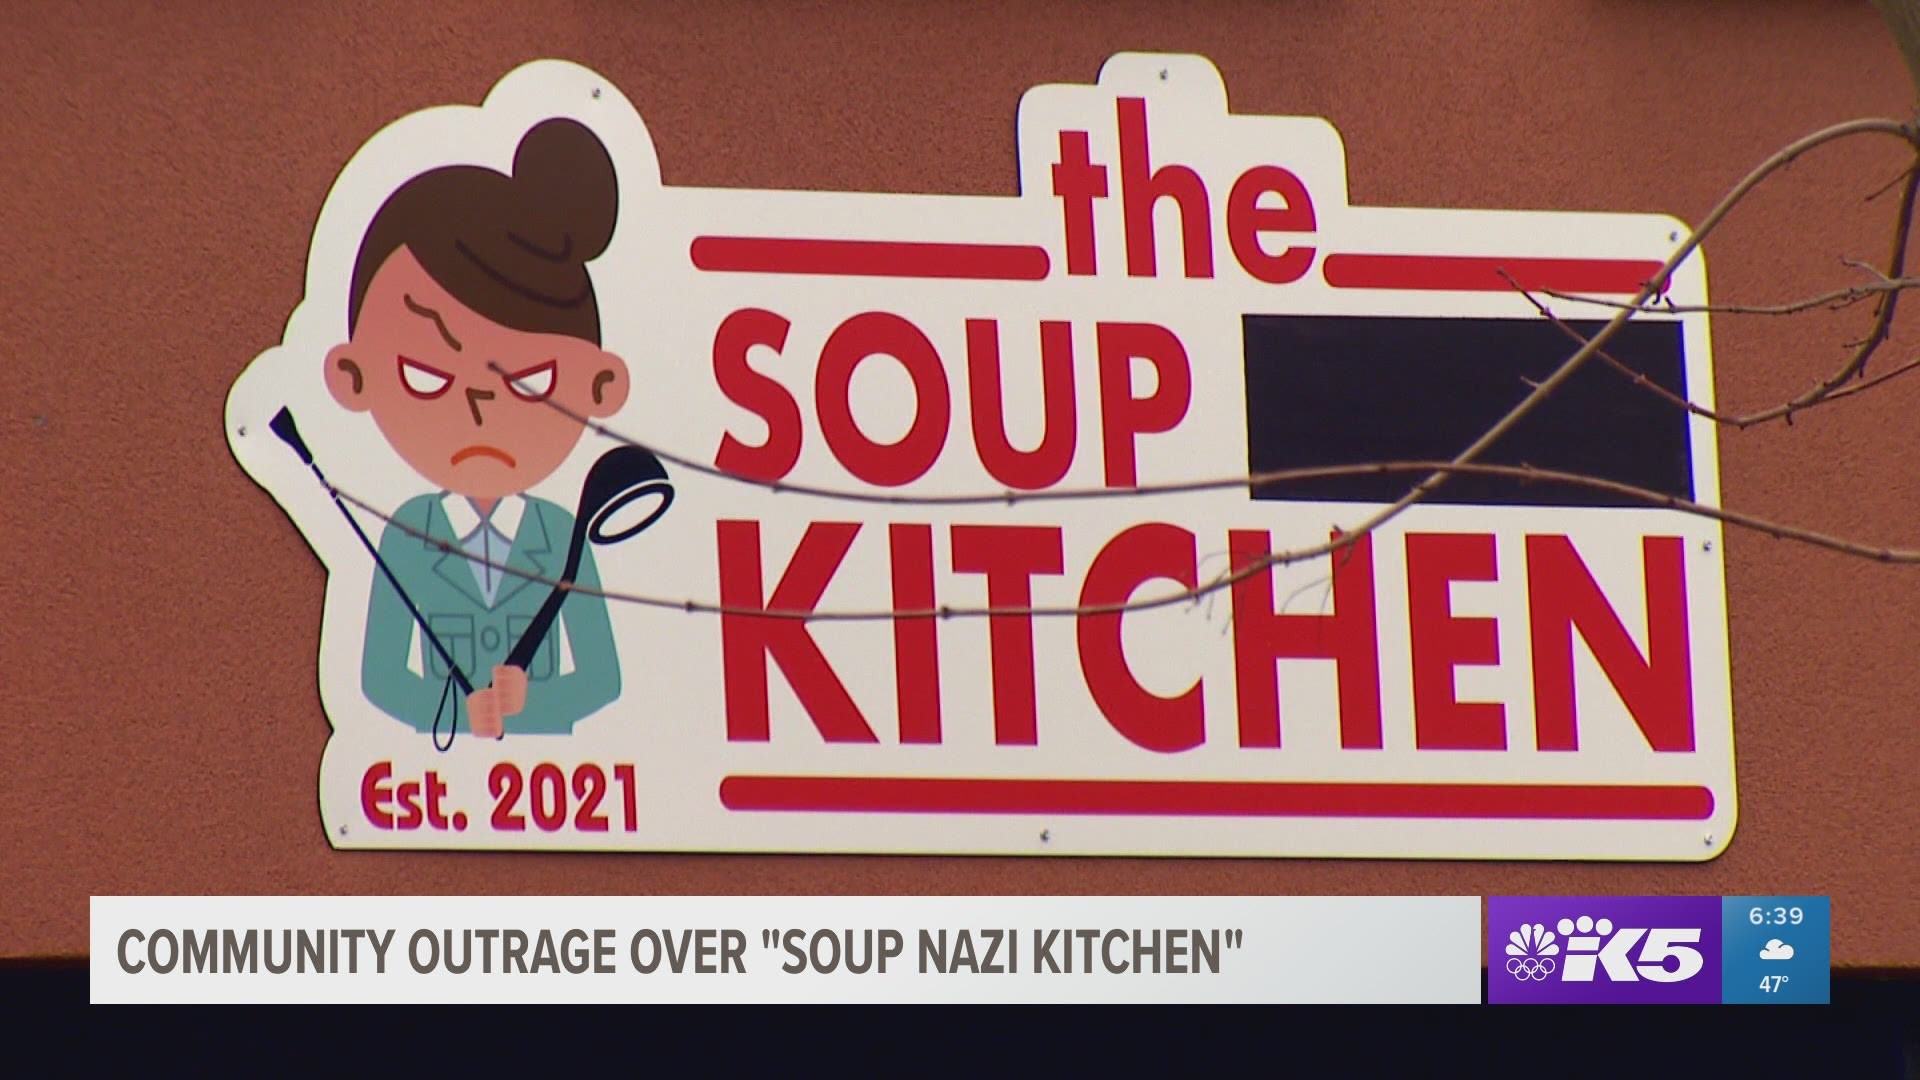 The owner of the restaurant formerly named "Soup Nazi Kitchen" said he would rename his business after outrage from residents in Everett.